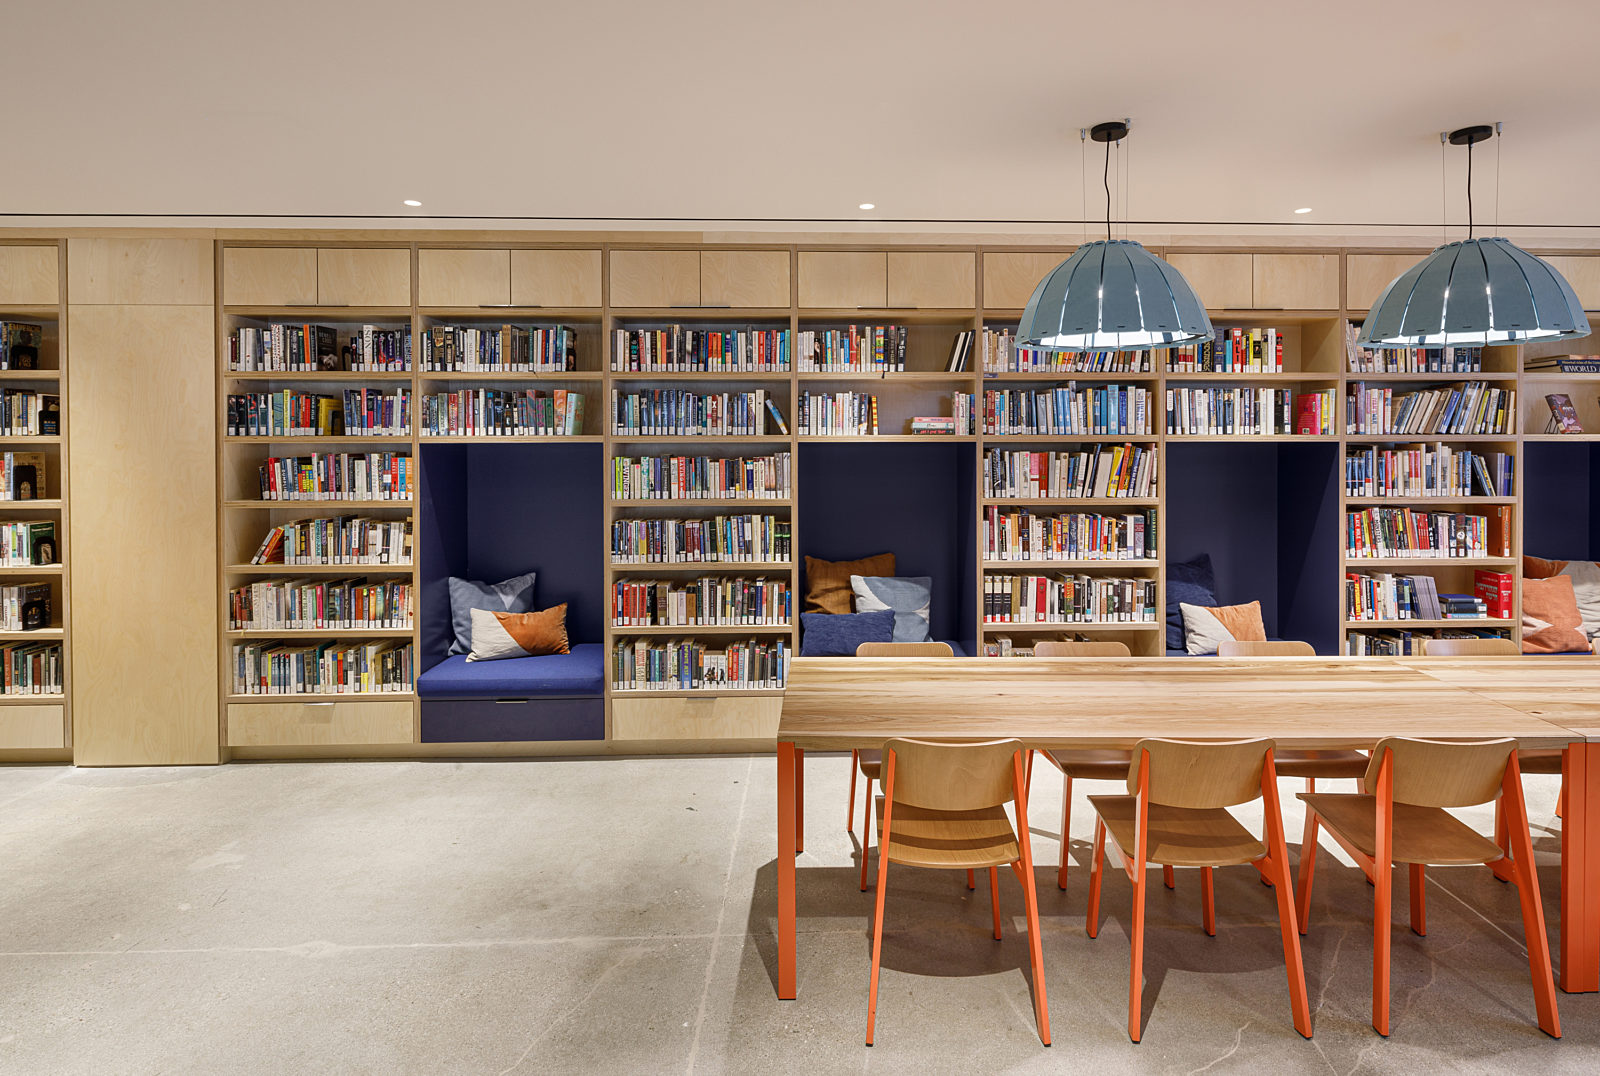 An open space with custom wooden bookshelf booths and a large meeting table surrounded by six chairs. Perfect for reading and meetings.